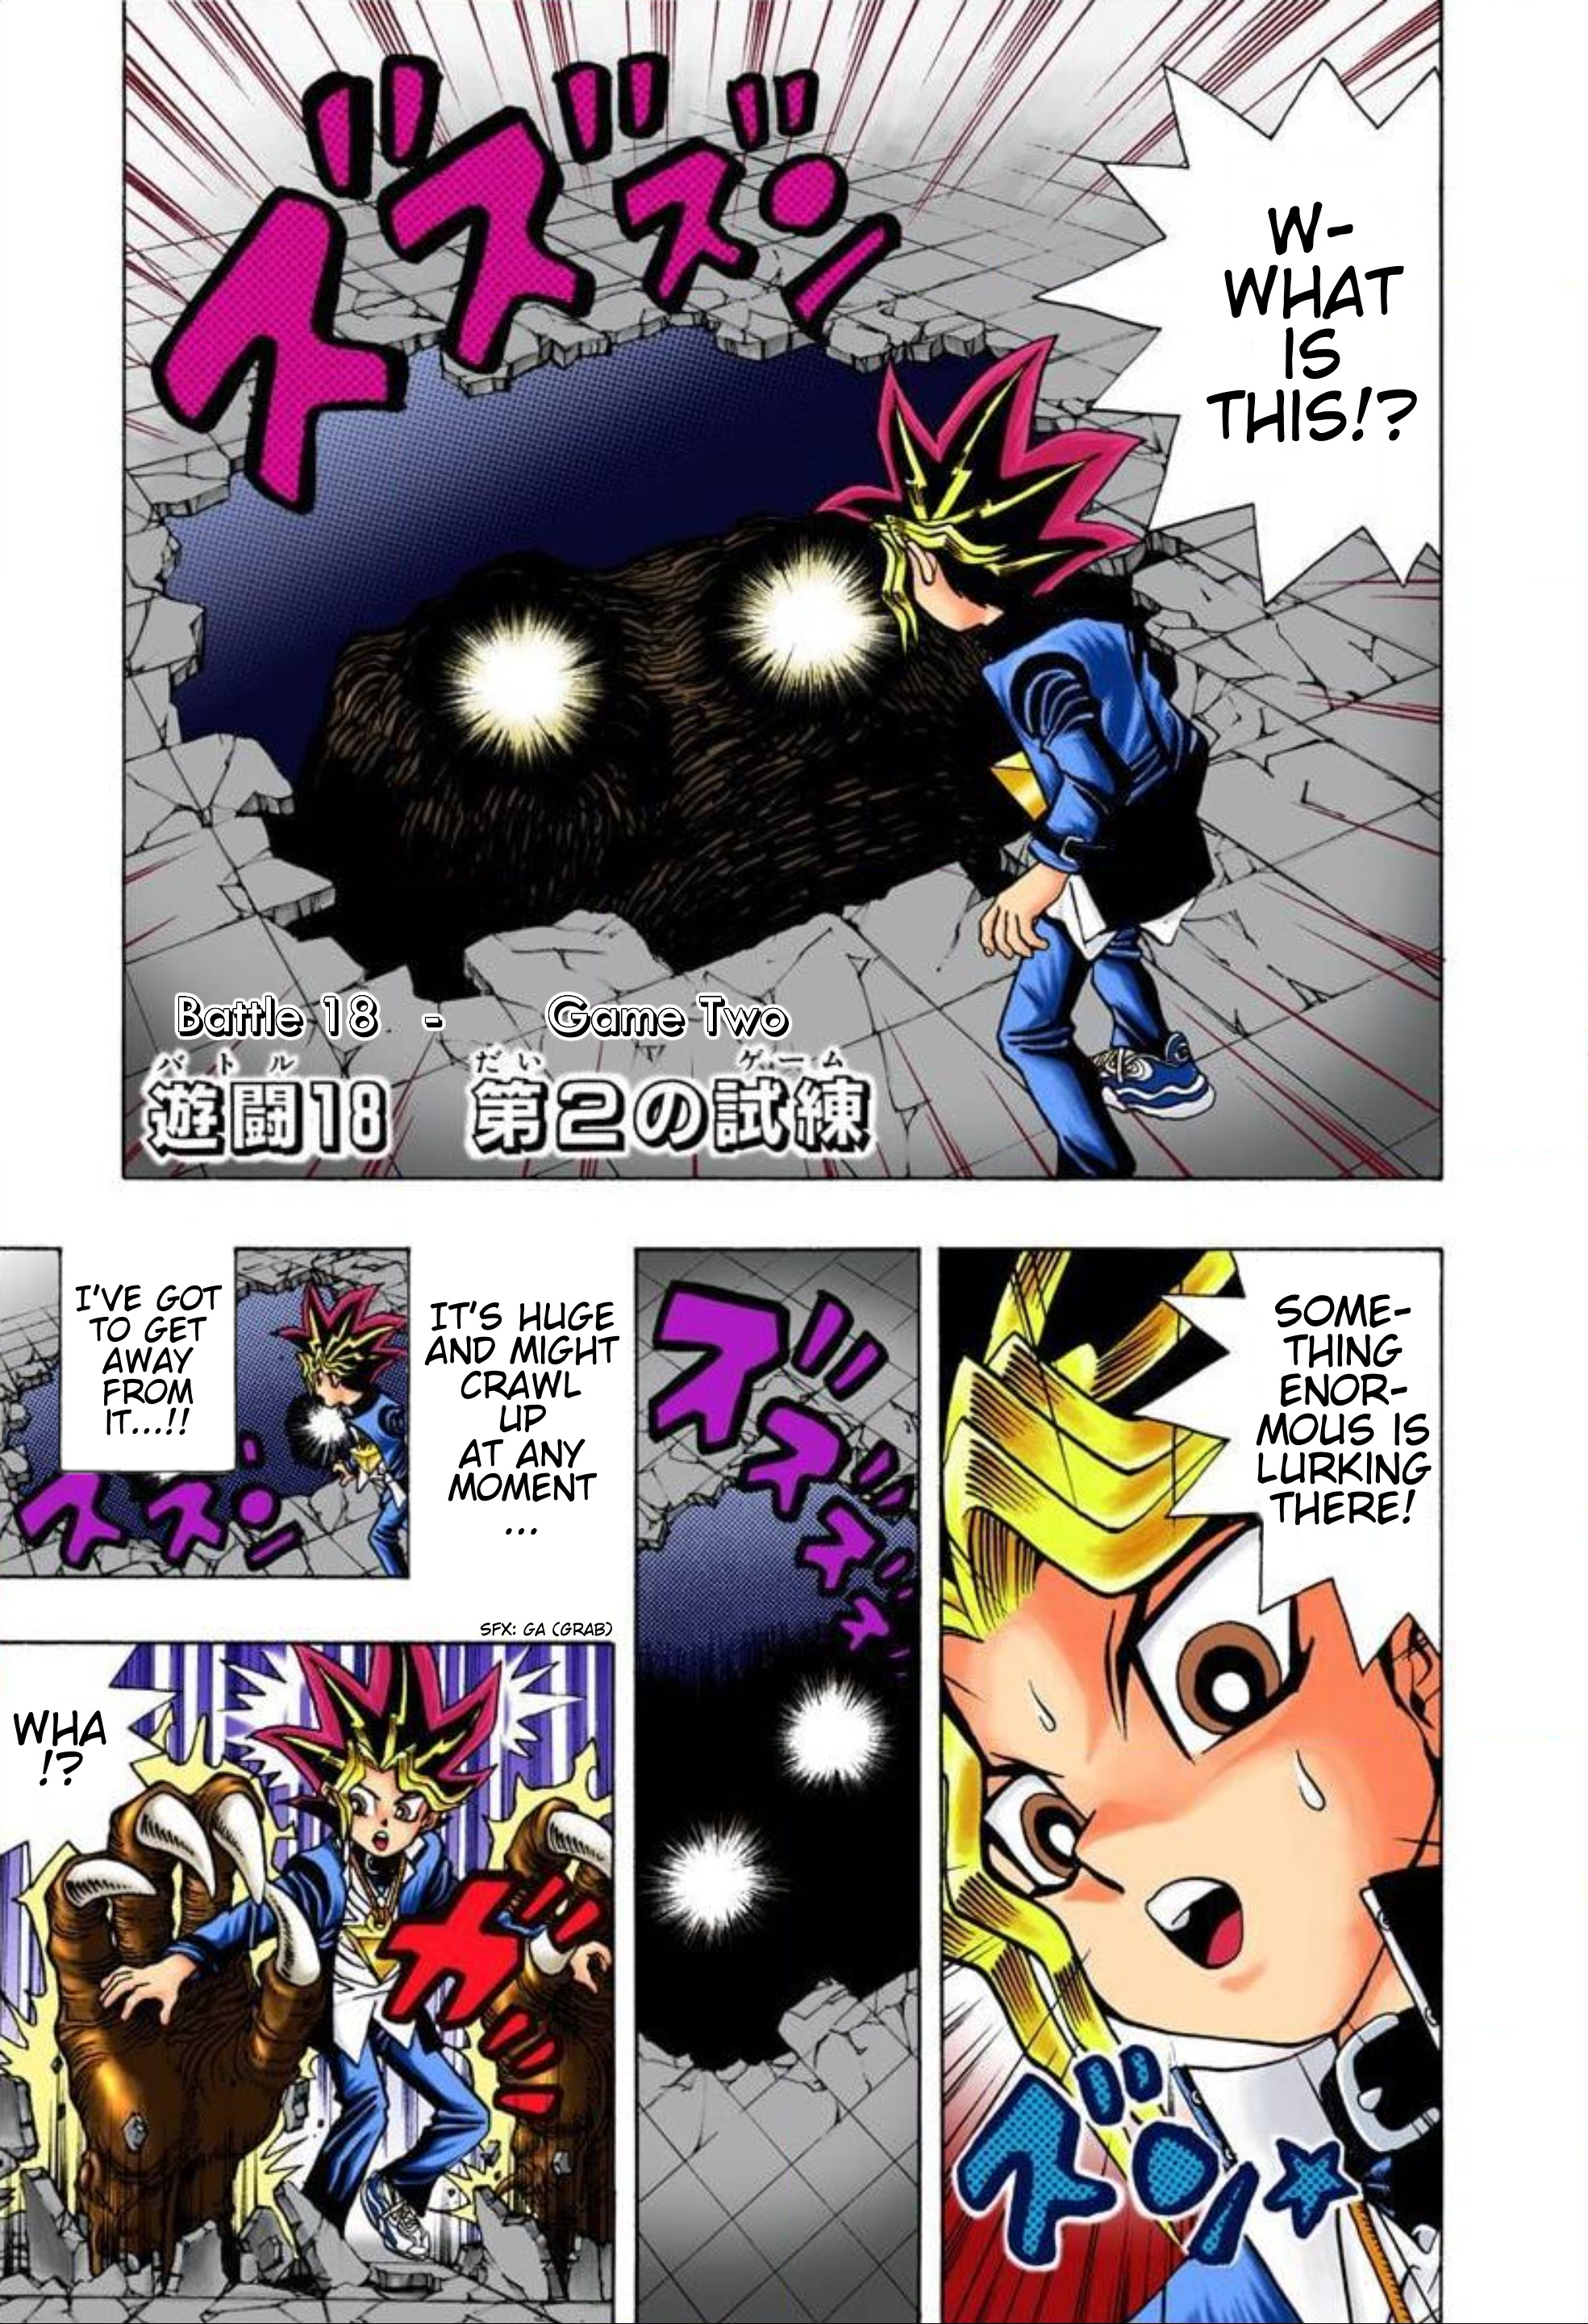 Yu-Gi-Oh! - Digital Colored Comics Vol.3 Chapter 18: Game Two - Picture 1